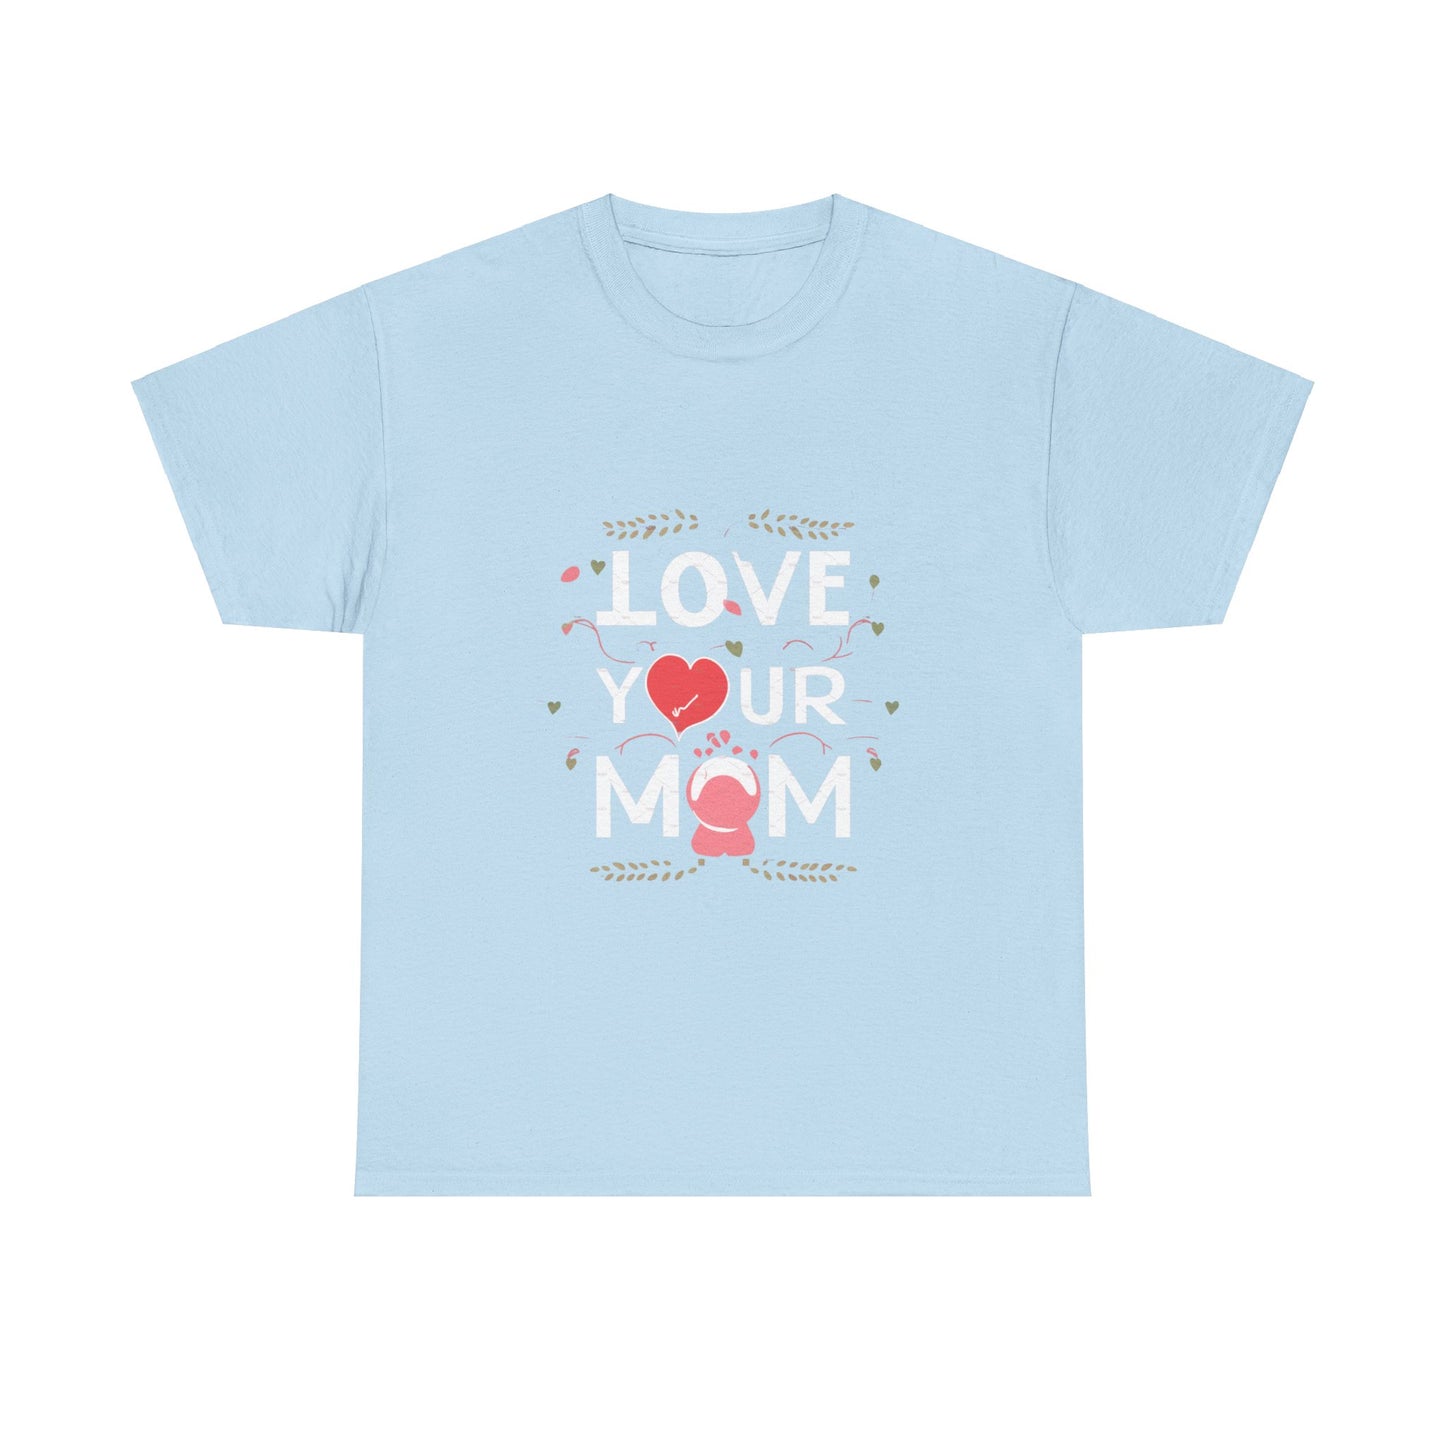 Love Your Mom Shirt